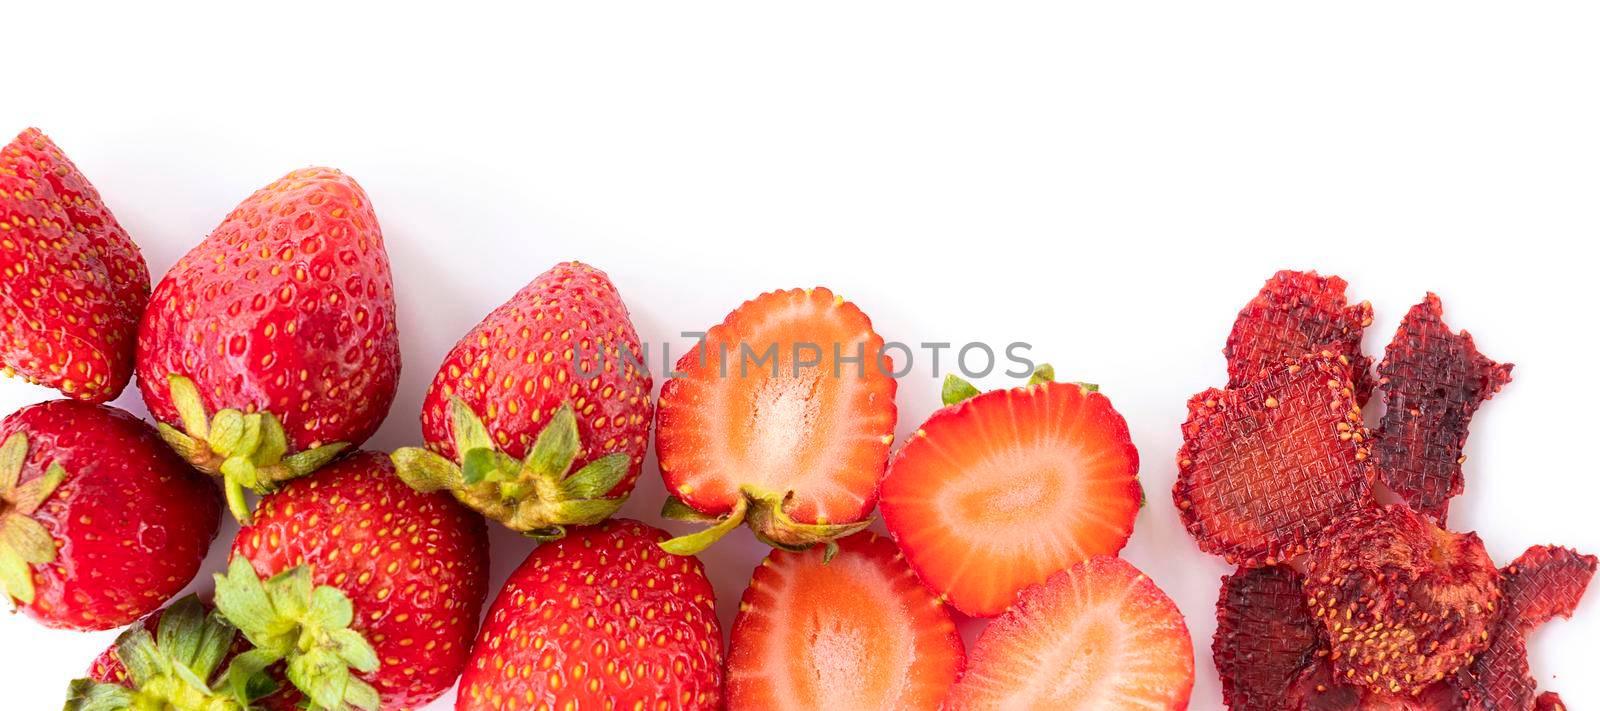 banner with healthy sweets. ripe sweet strawberries, red strawberry slices, dried strawberry pieces. fruit chips. healthy food concept. top view. by Leoschka